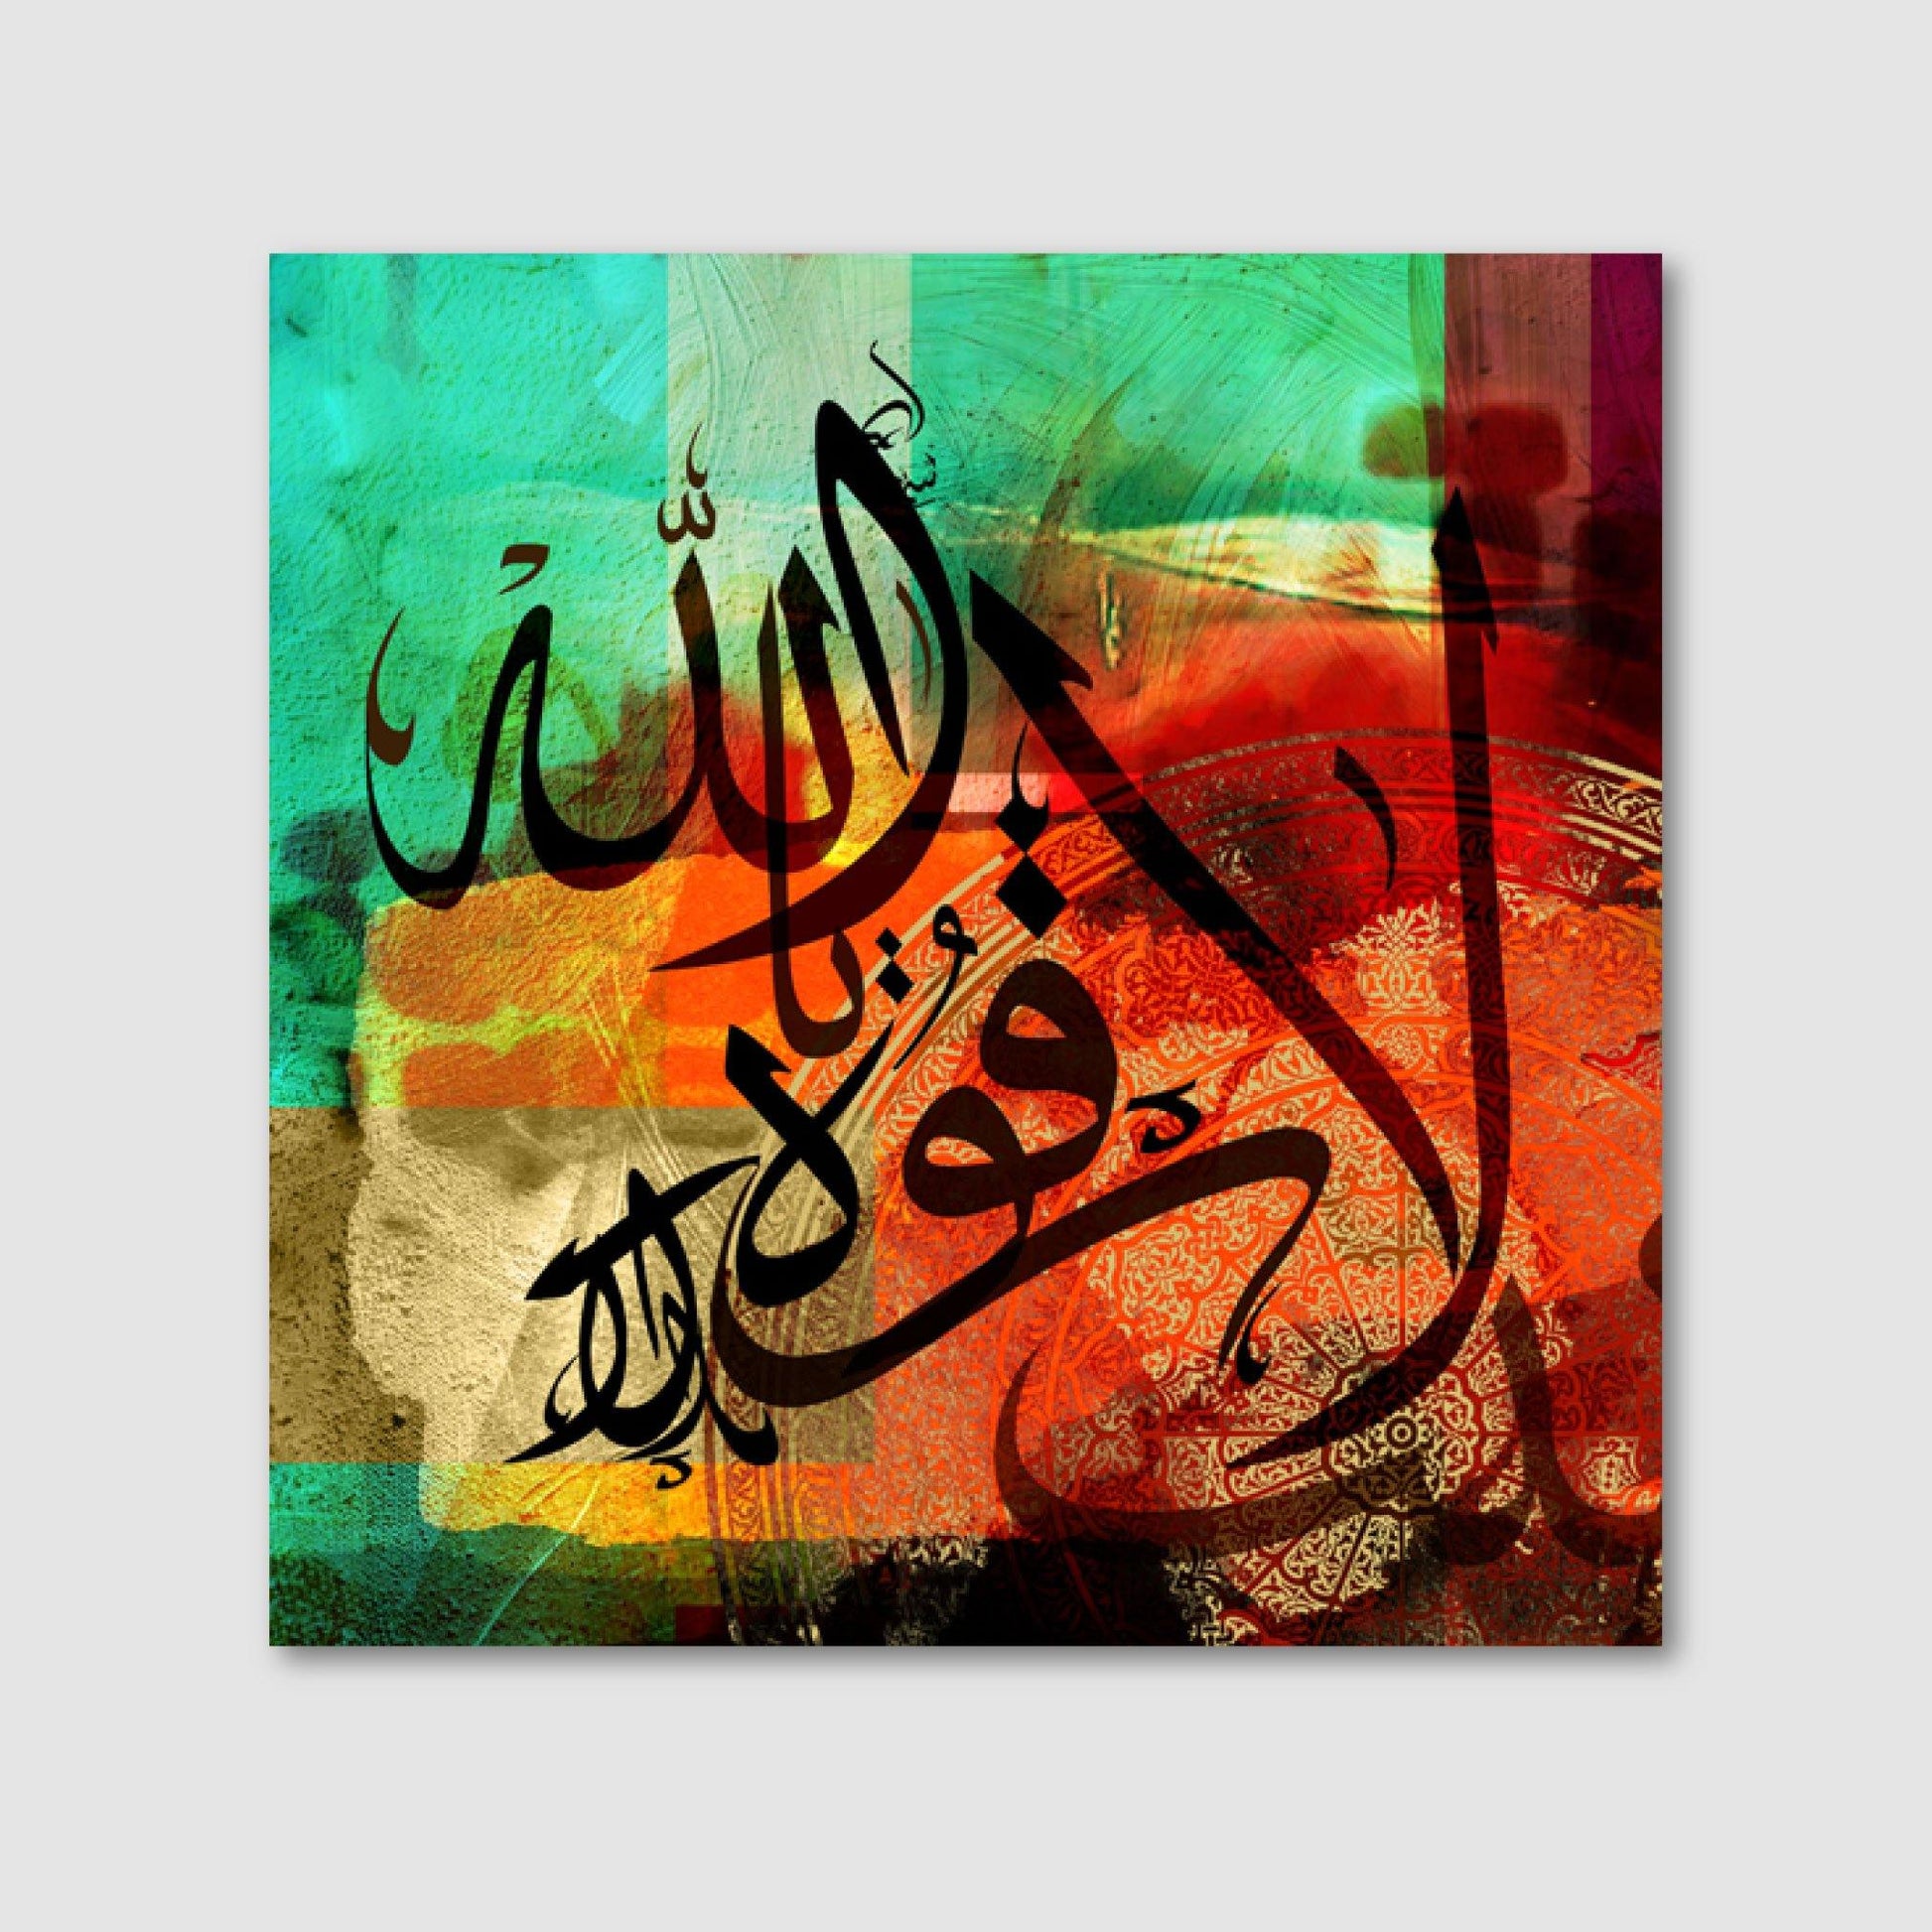 There is no power but God - The Art Gallery Modern Arabic Calligraphy by Helen Abbas